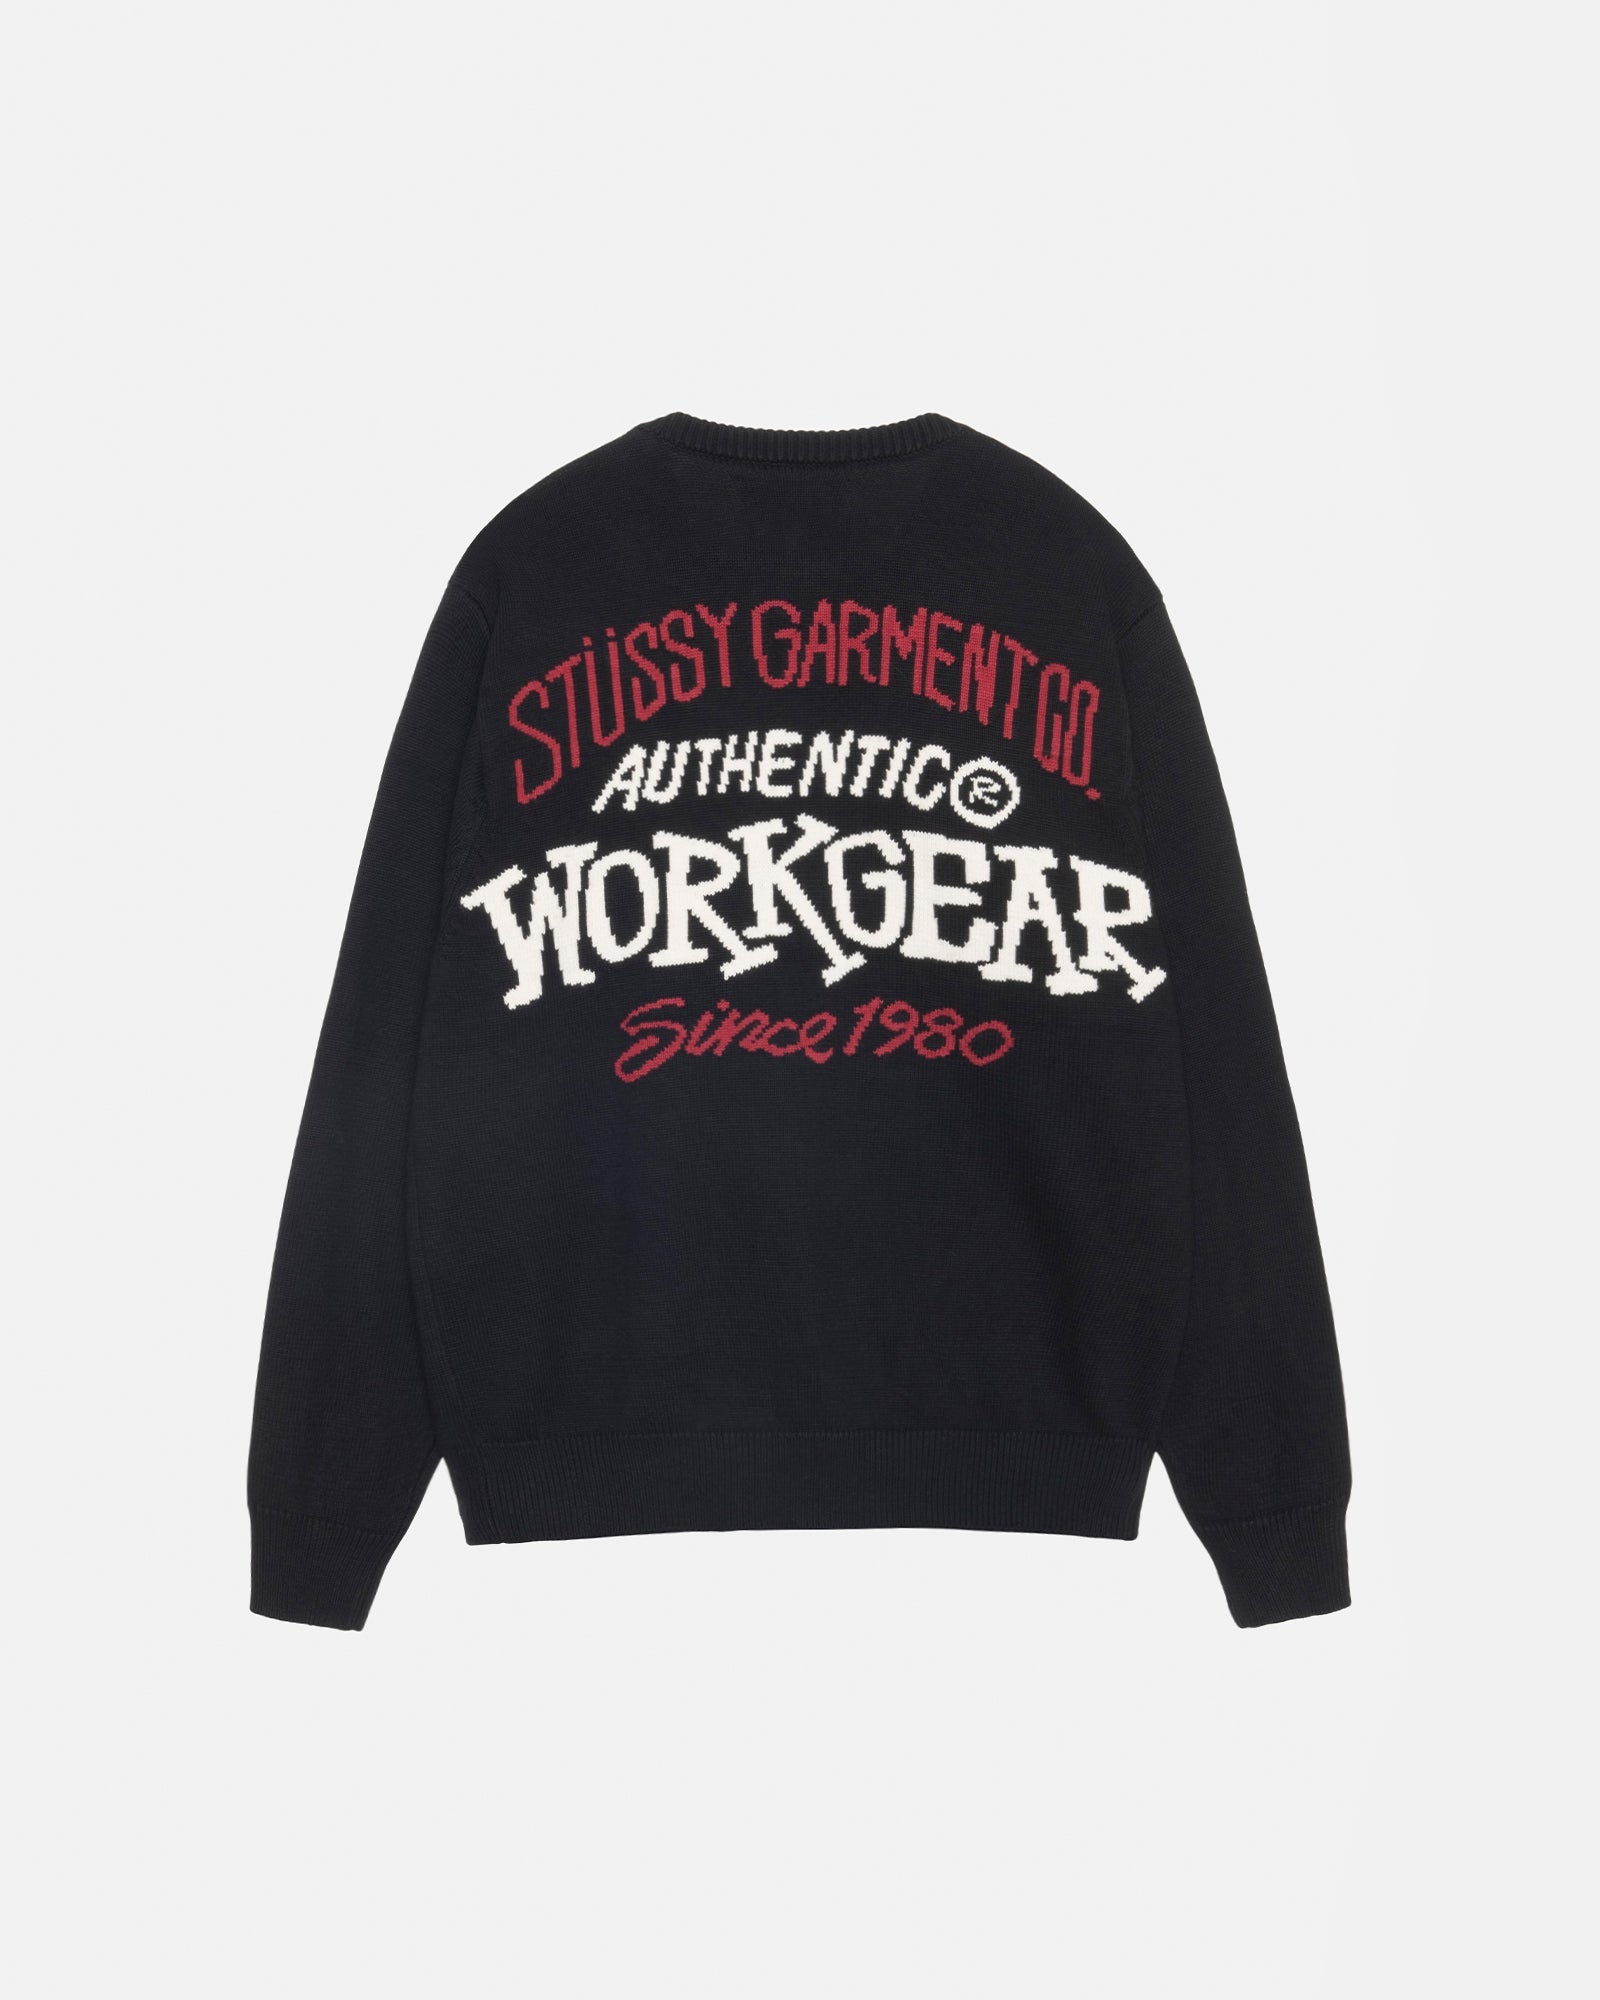 STUSSY AUTHENTIC WORKGEAR SWEATER